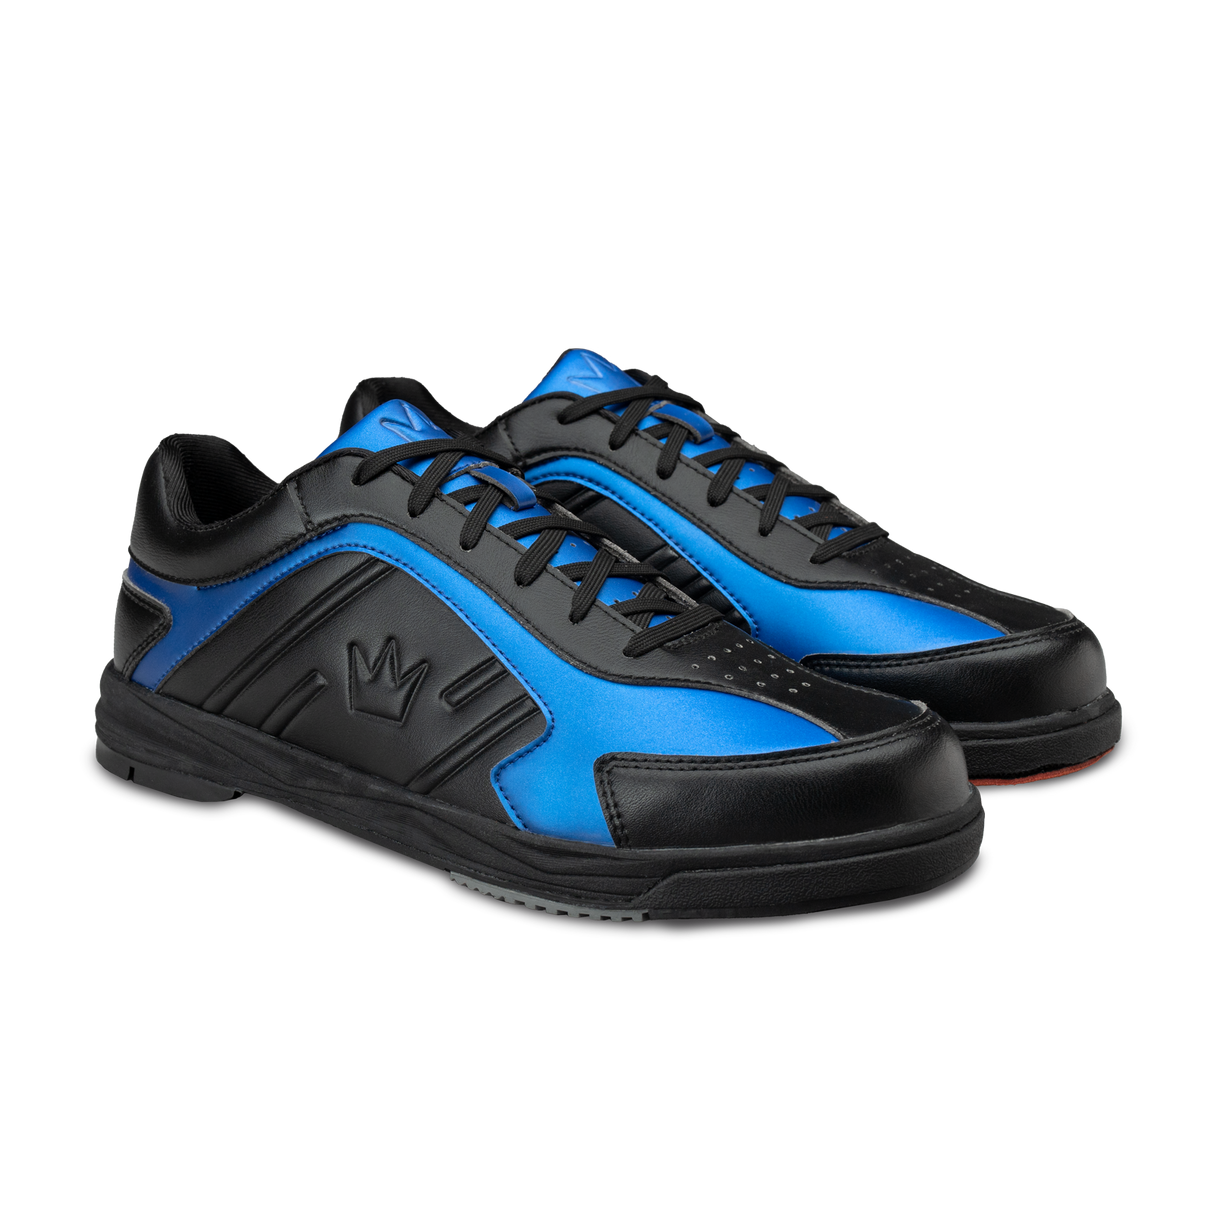 Brunswick Siege Royal Bowling Shoes * Soft, durable synthetic upper * Molded EVA midsole * Toe protection for durability * Extreme cushion comfort Ortholite footbed * Multi-zone push away rubber * Includes: #4, #6, and #8 Slide *  * 